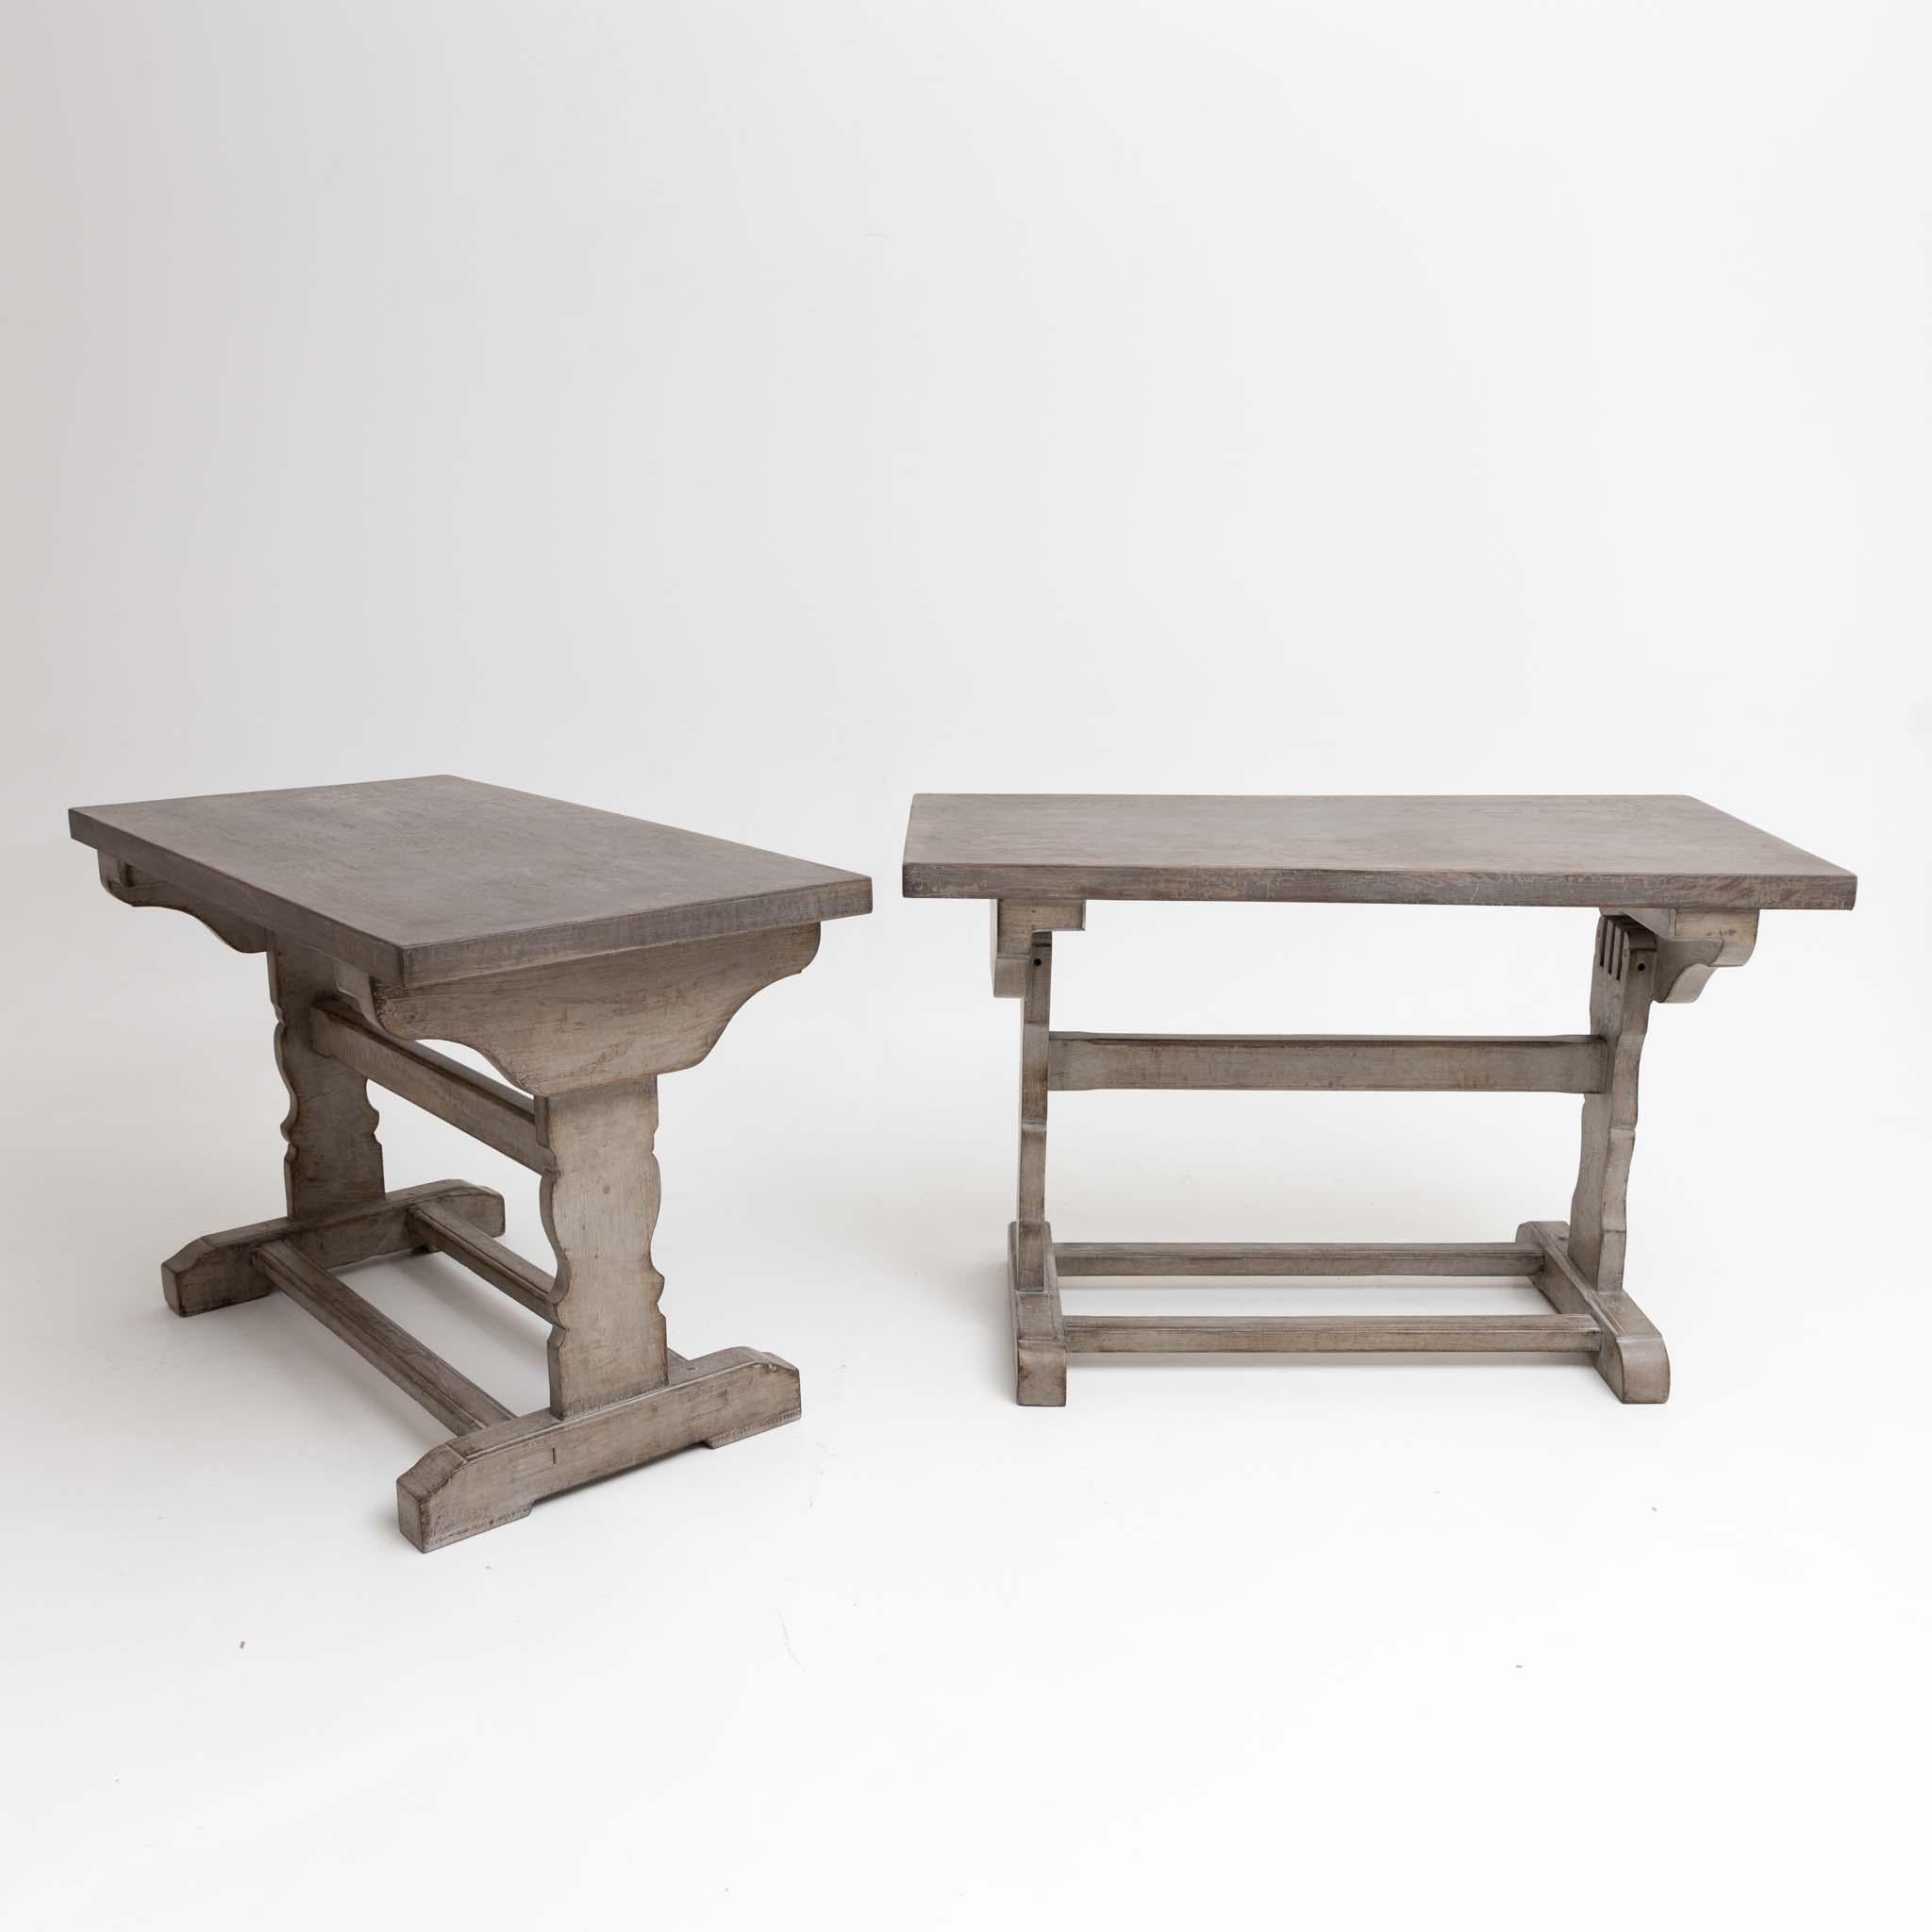 Pair of softwood desks with H-shaped brace wavy cut out legs. The gray setting is new and decoratively rubbed through.